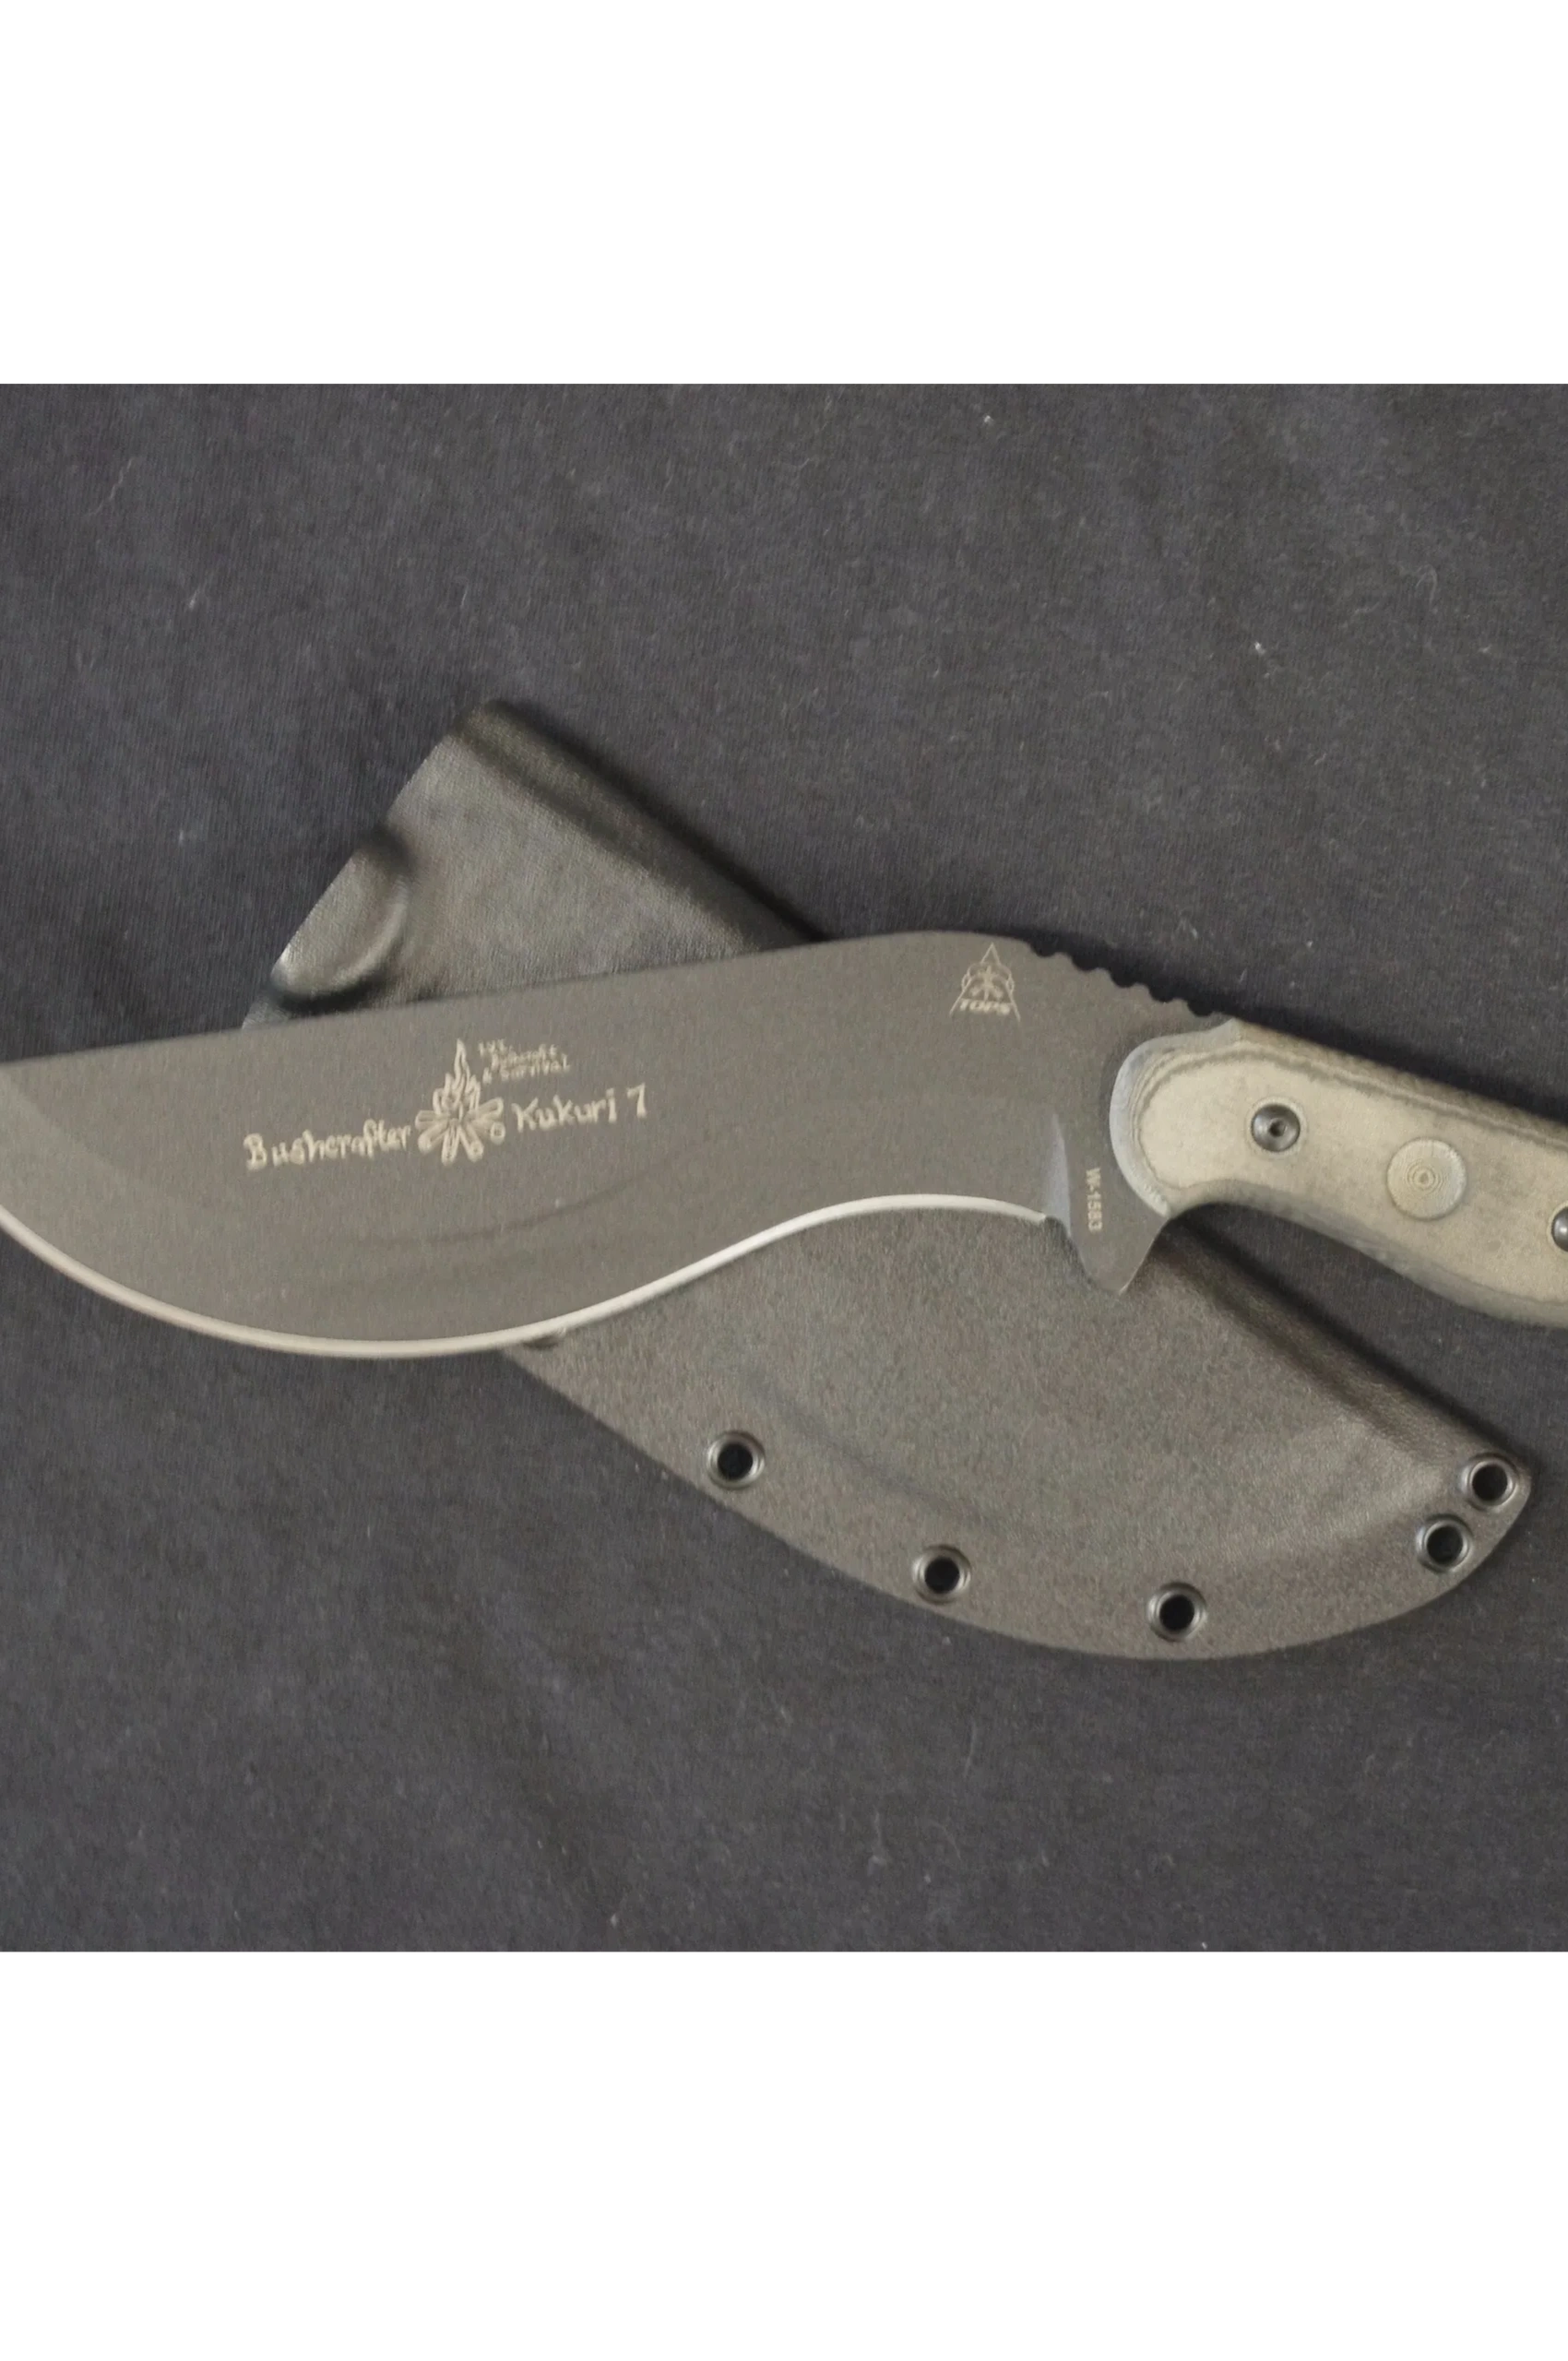 TOPS KNIVES BUSHCRAFTER KUKURI 7.0 CUSTOM KYDEX SHEATH BY RED HILL SHEATHS (Knife not included)